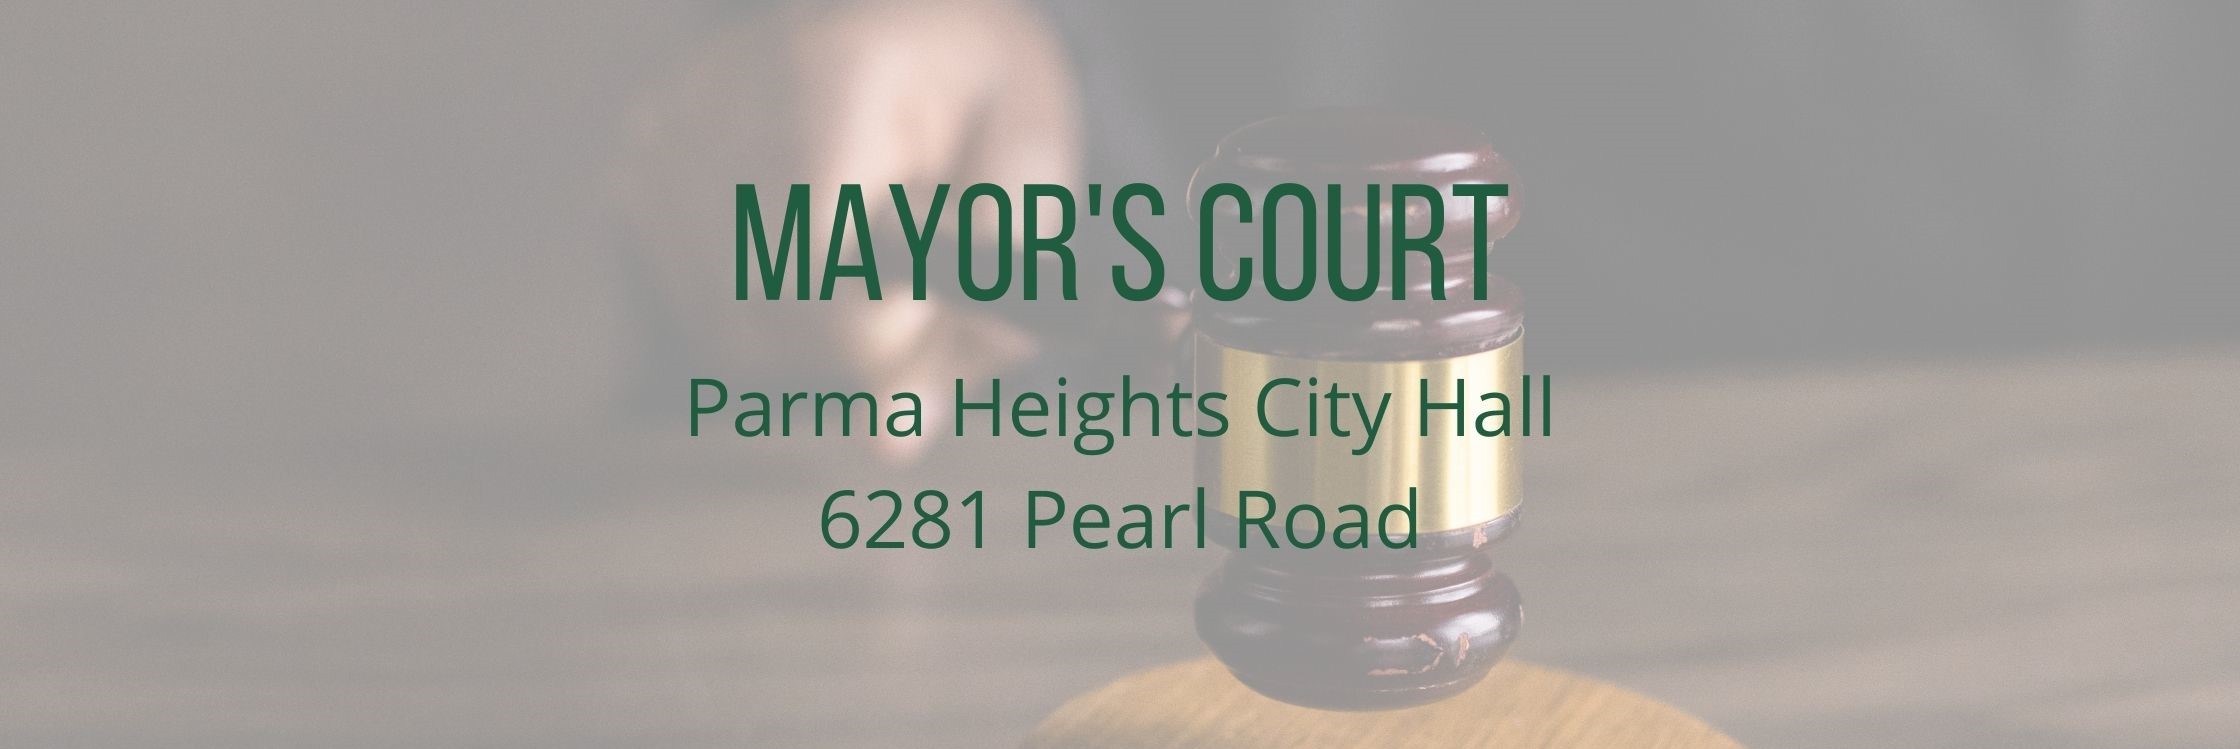 Mayor s Court City of Parma Heights